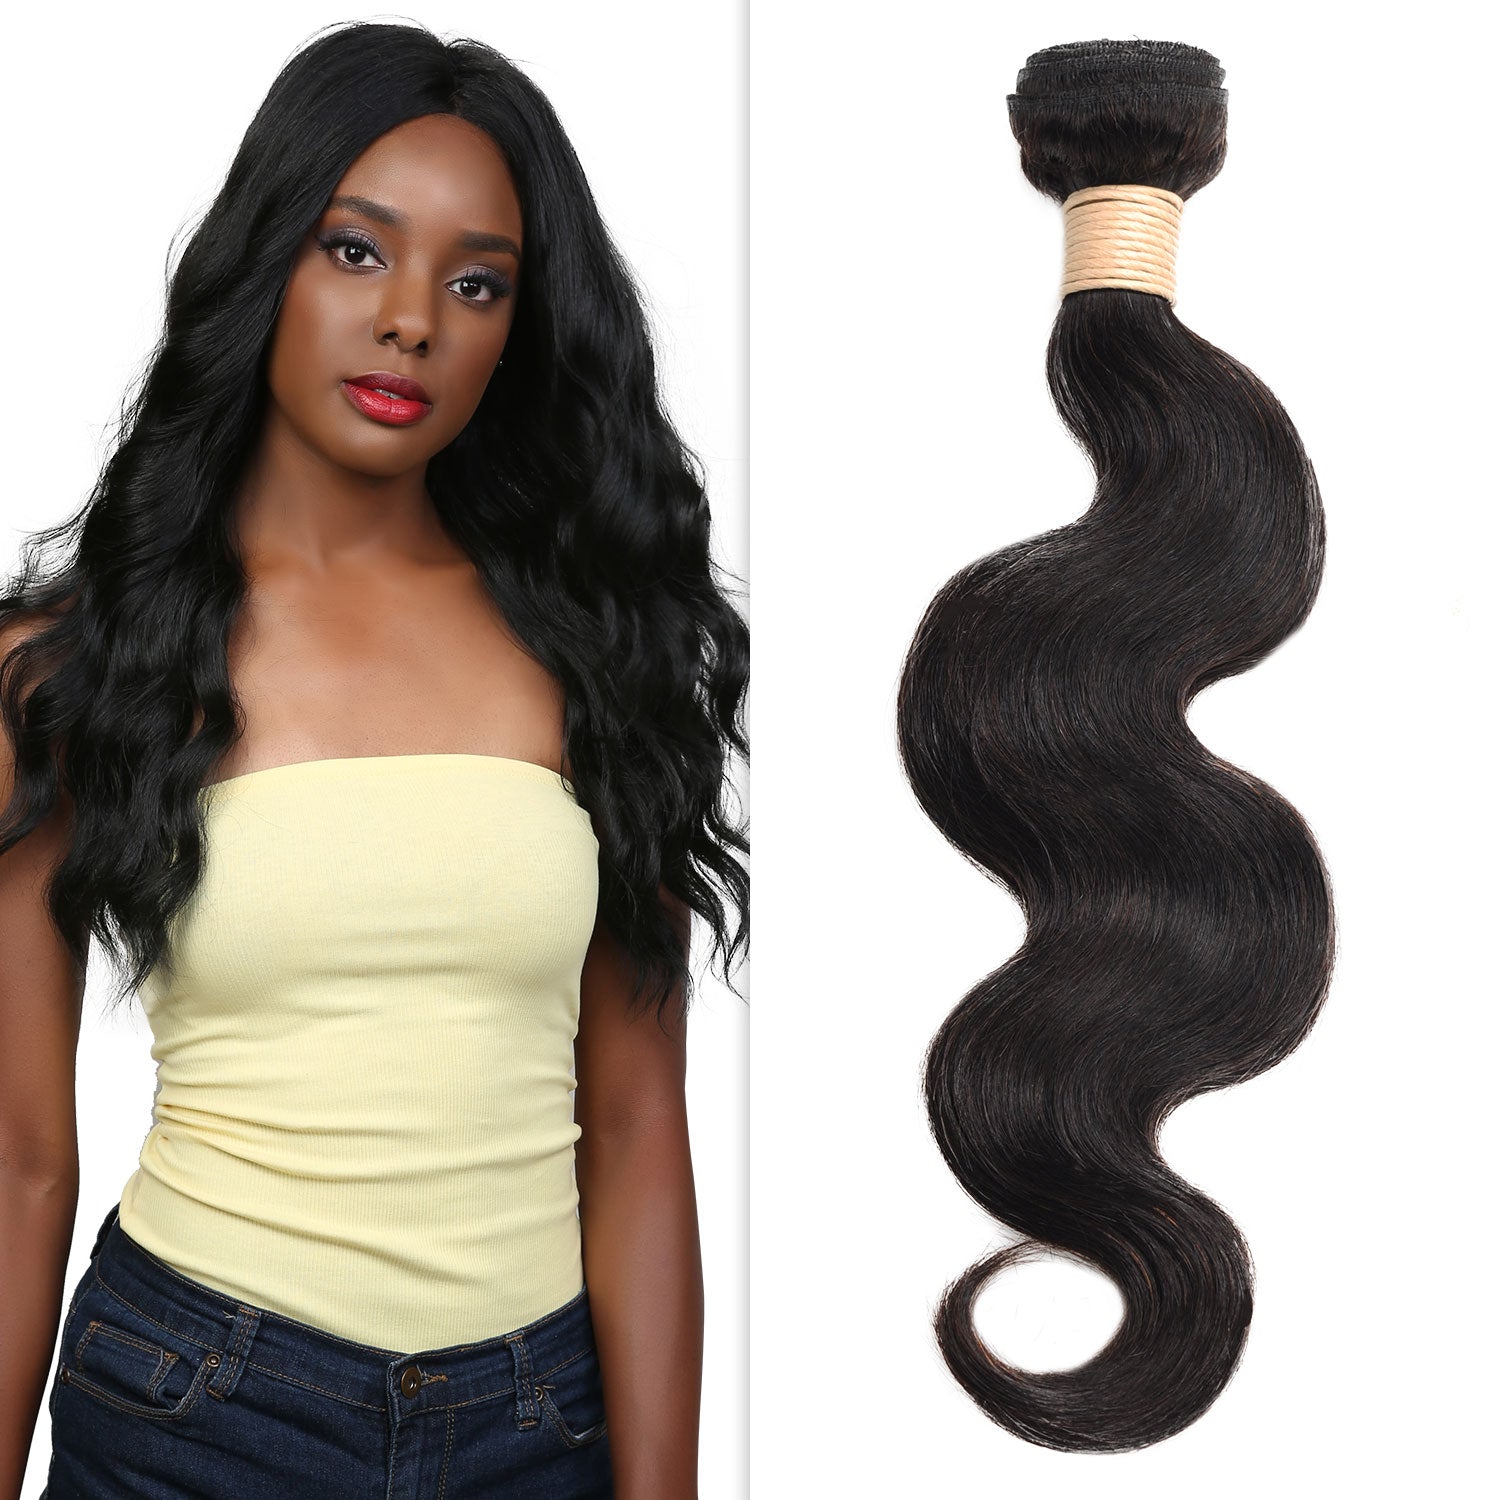 100% Virgin Remy Human Hair Unprocessed Brazilian Weave Natural Body Wave